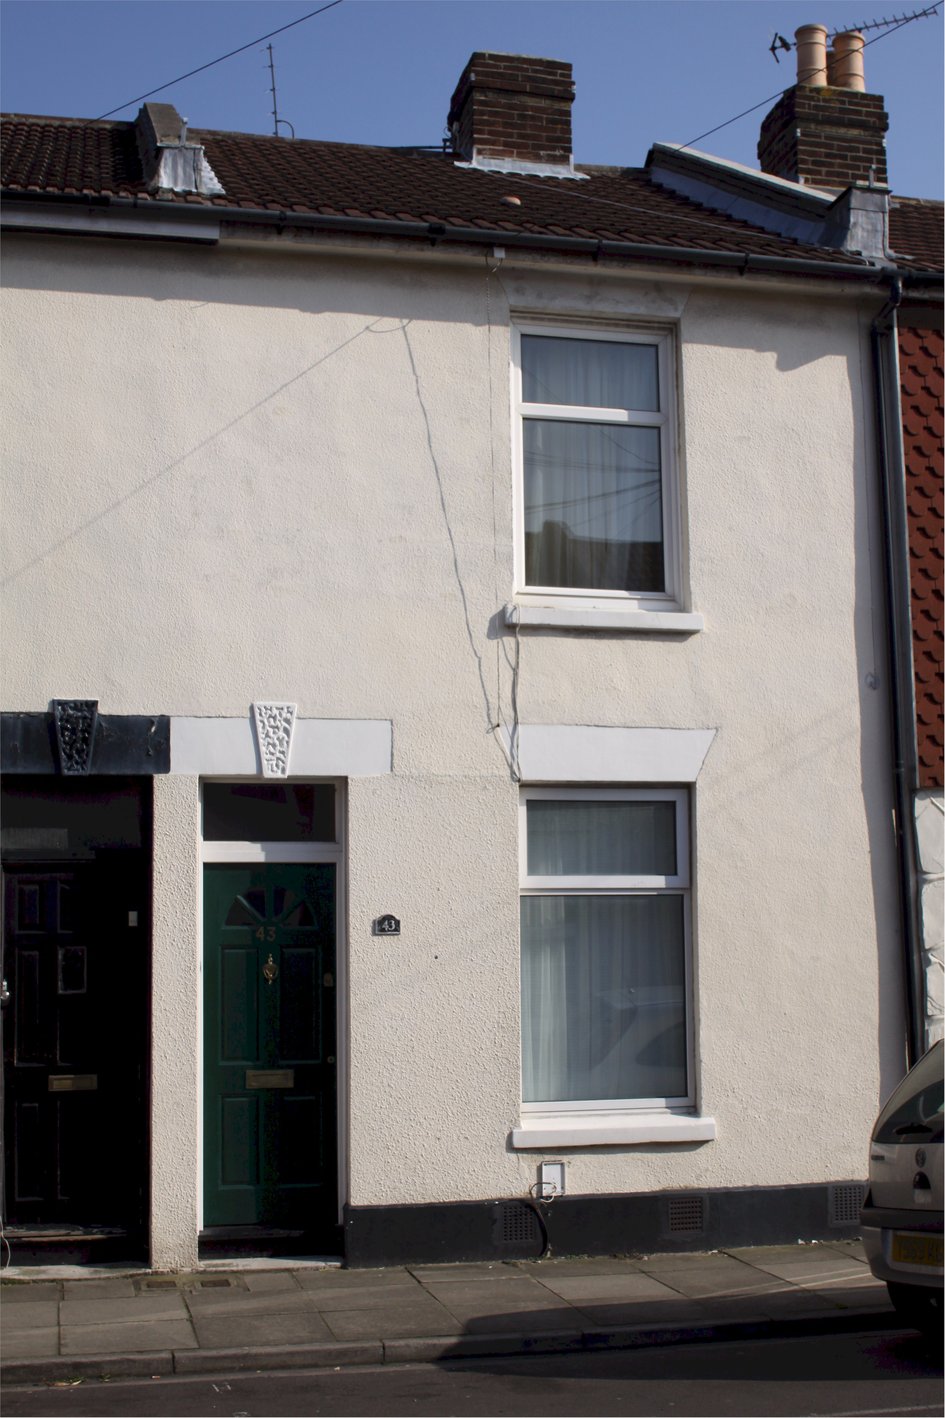 Napier Road, Southsea, Portsmouth - Image 11